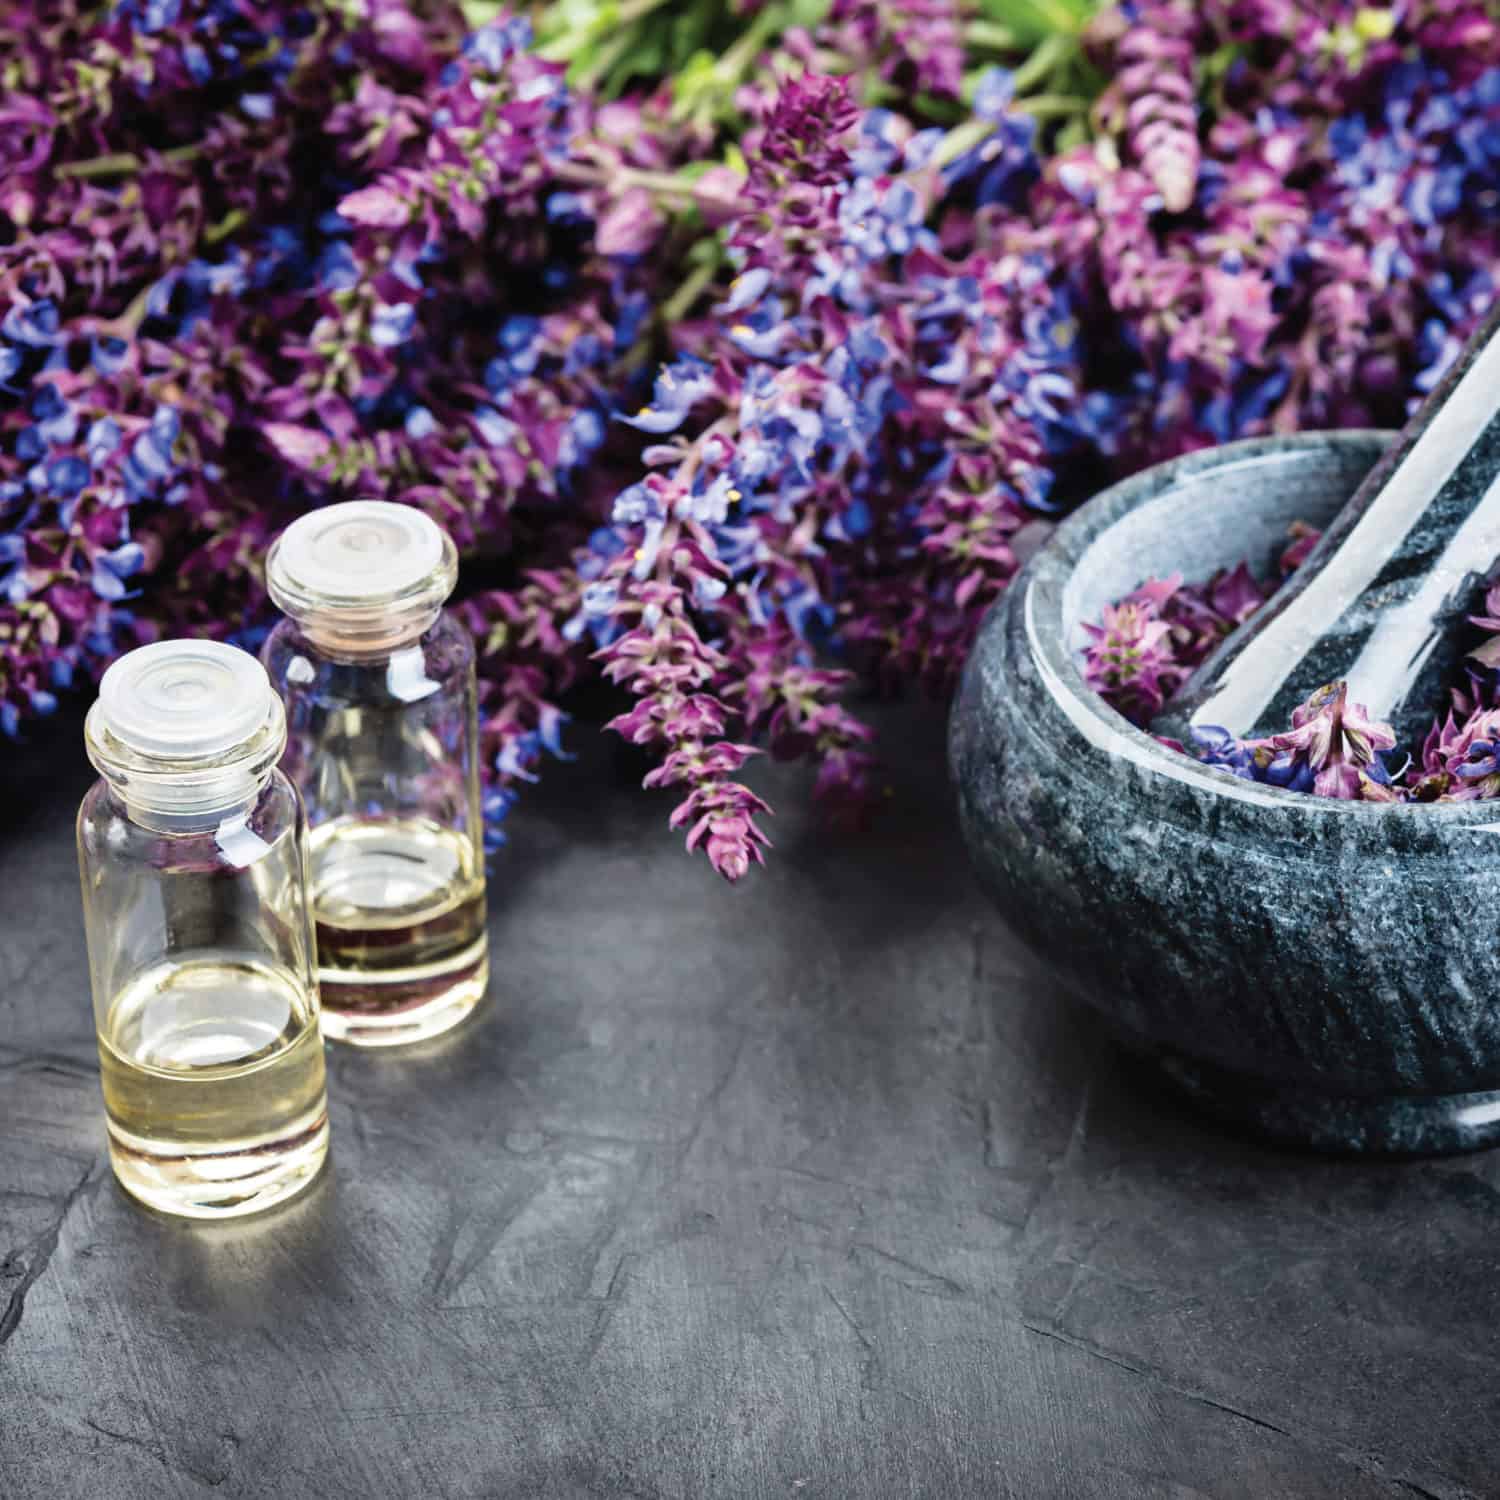 Clary Sage Oil Uses, Benefits and Potential Side Effects - Dr. Axe